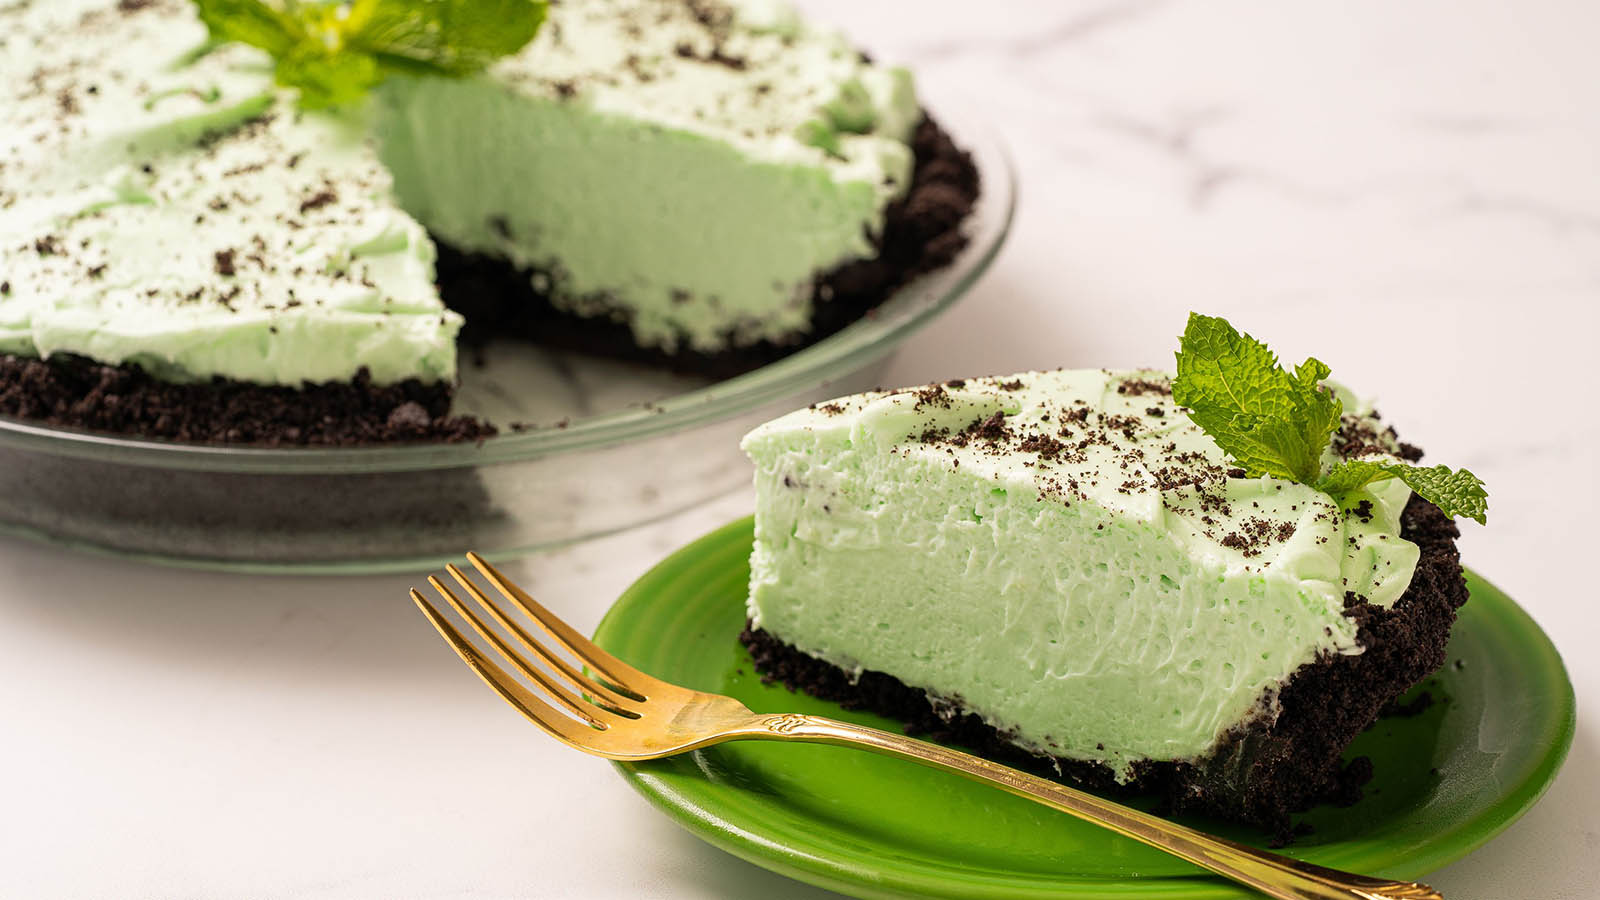 What Shade Of Green Are You? Quiz Grasshopper pie